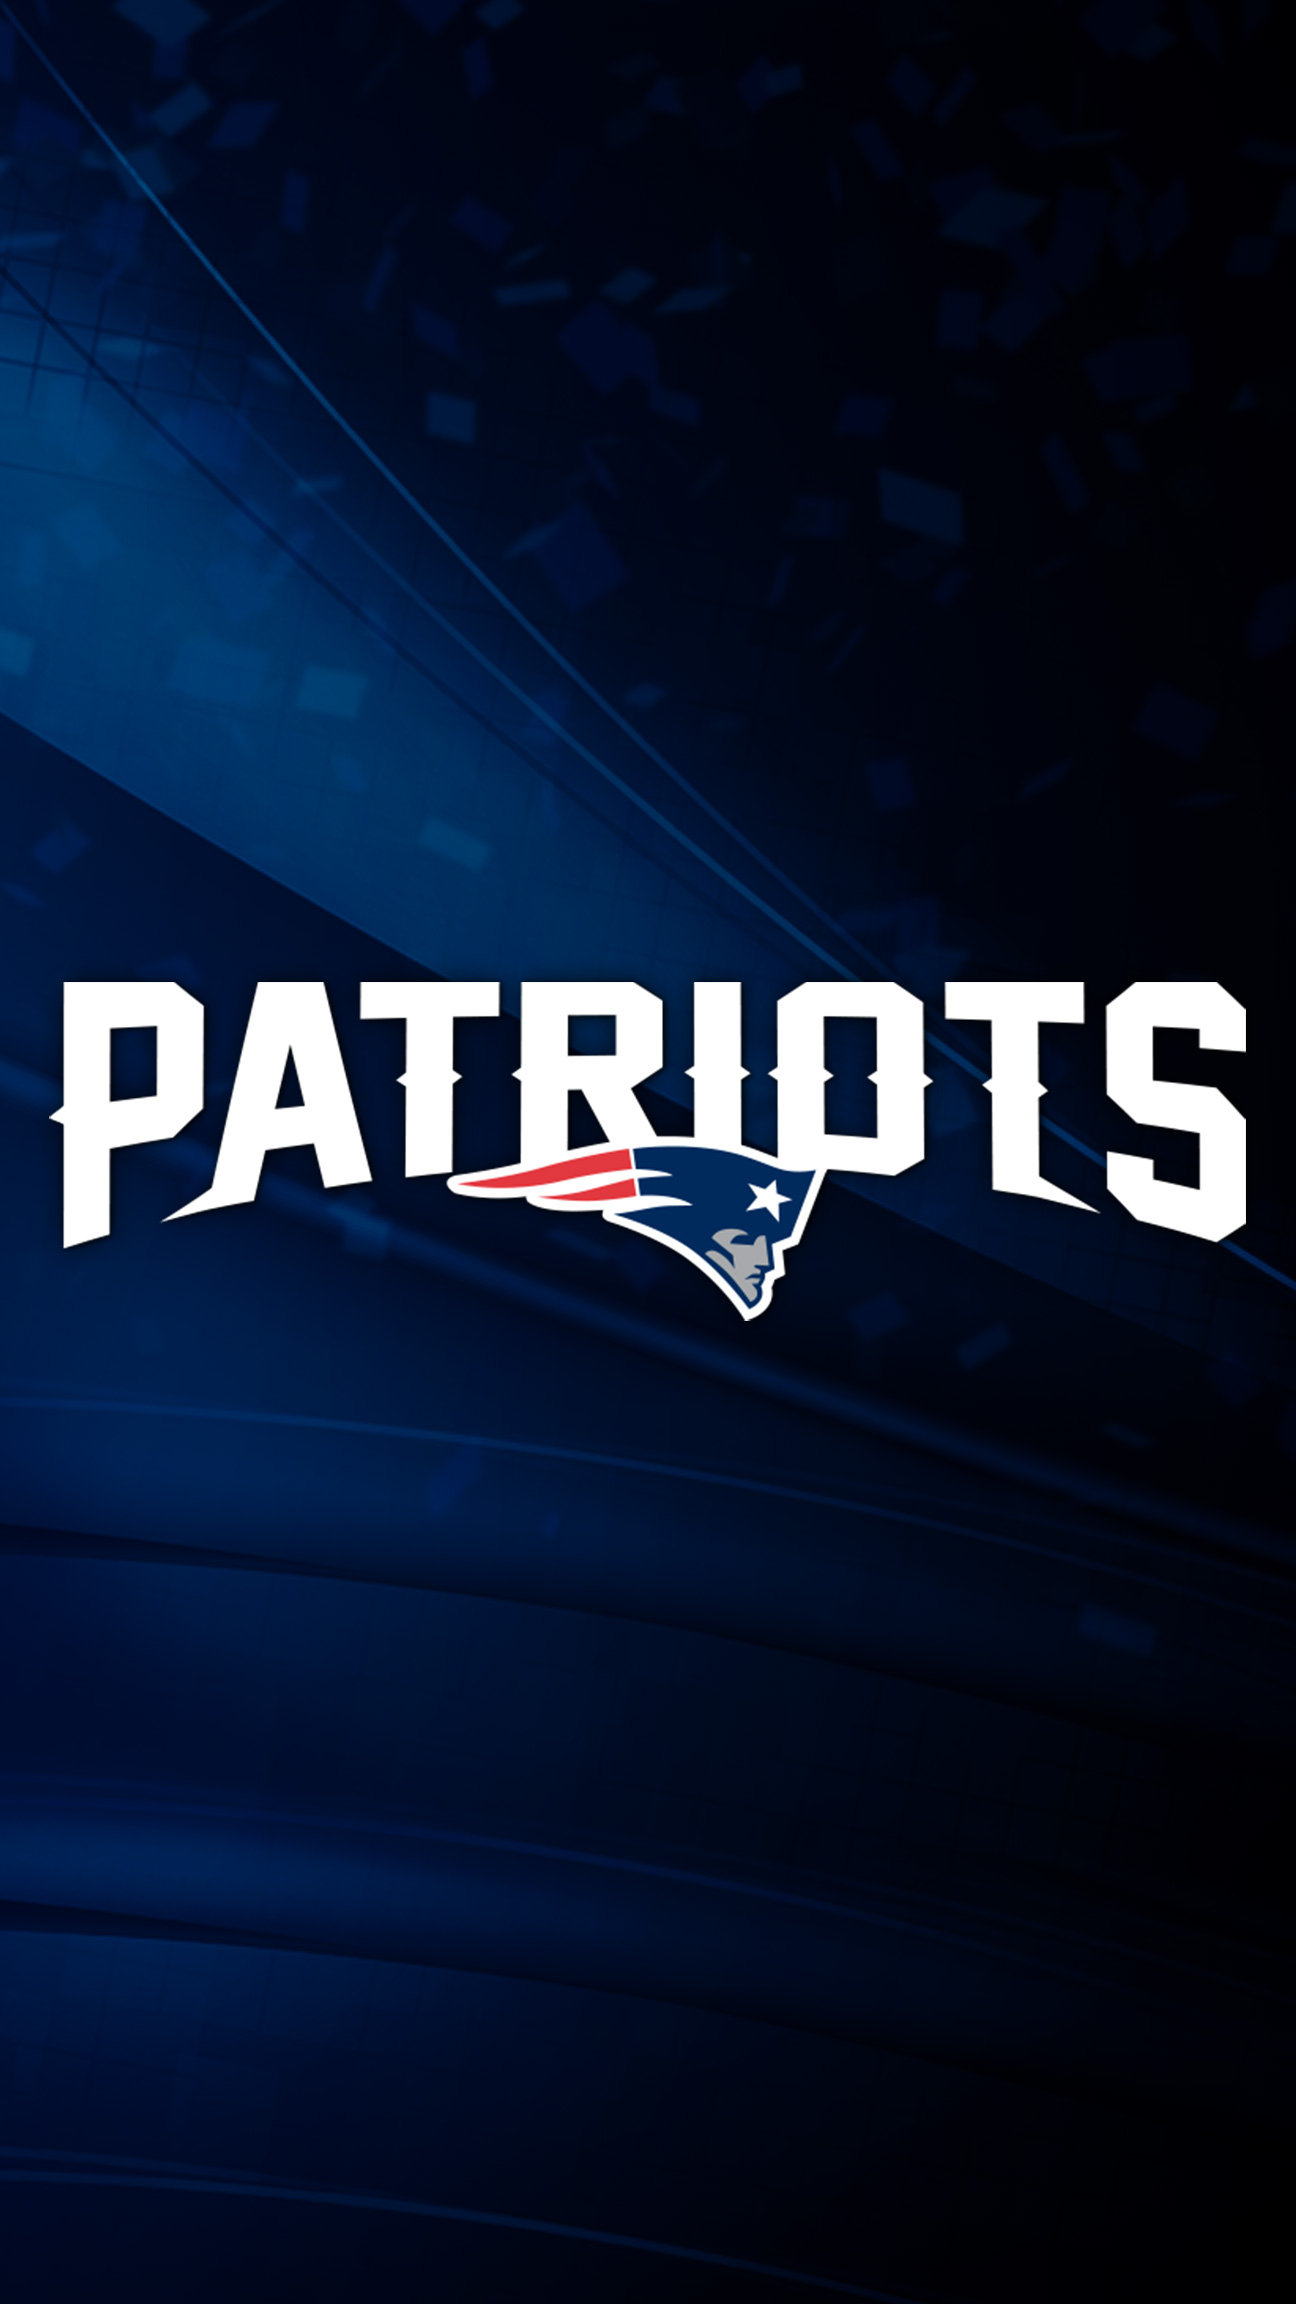 Patriots For Android Wallpapers